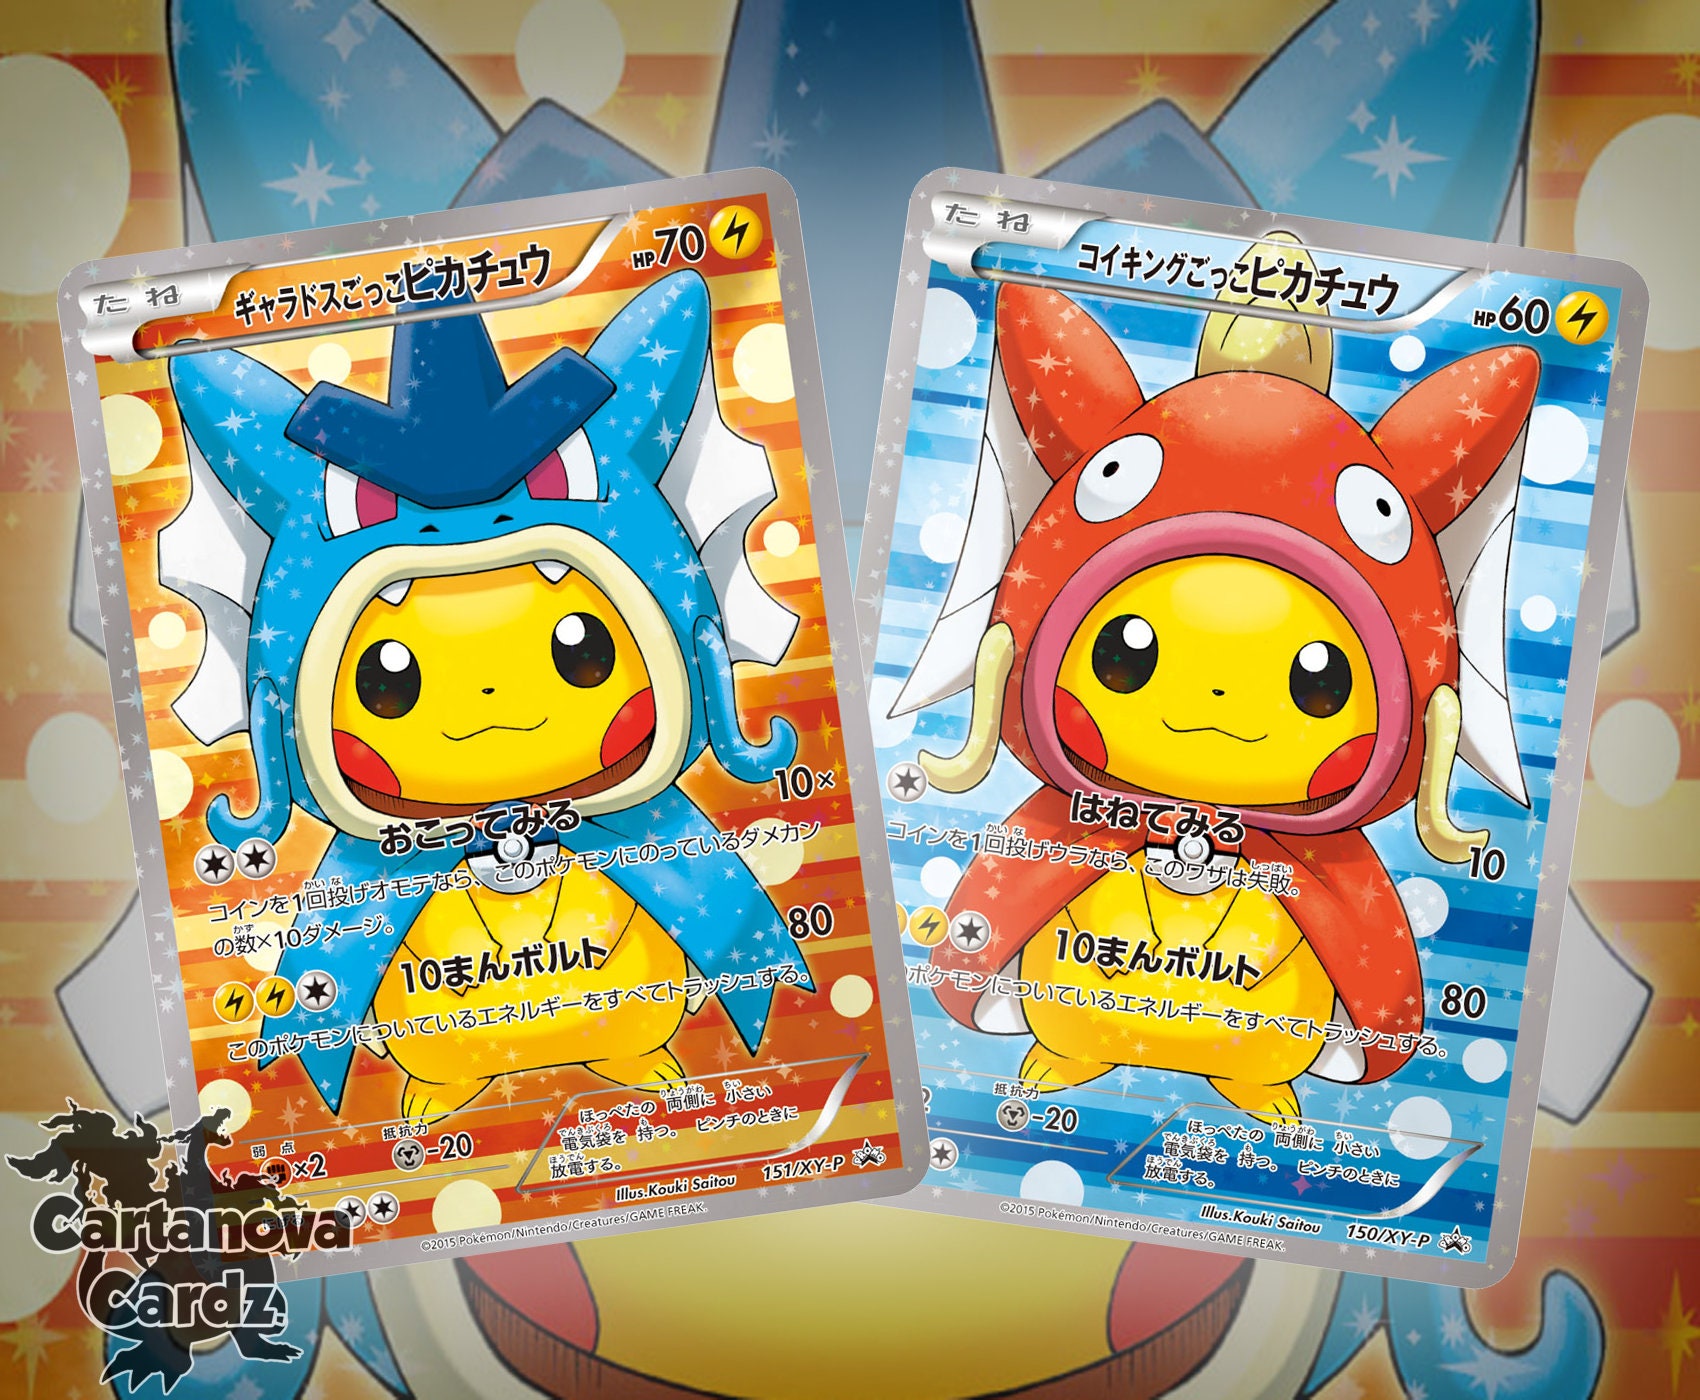 Are pikachu cosplay cards real